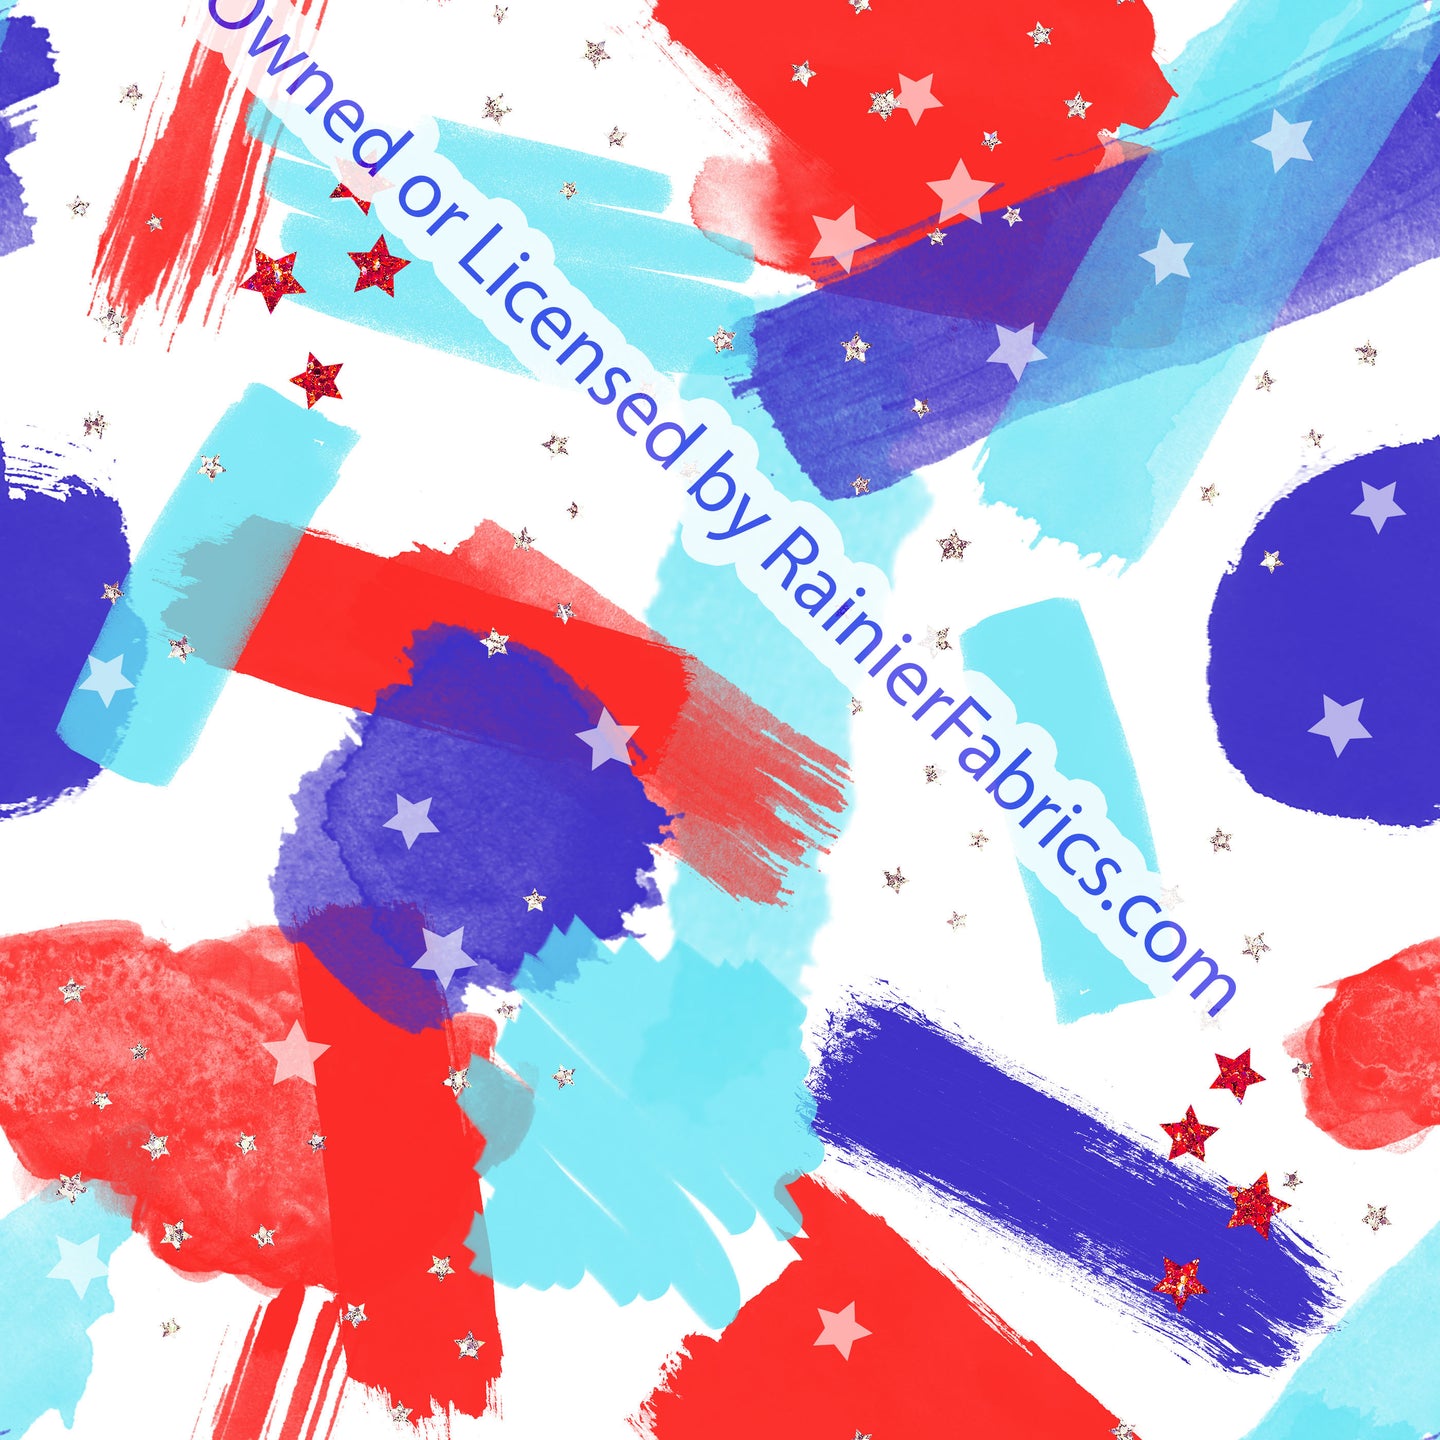 More July 4th Prints - Order by half yard -instructions below on base fabrics